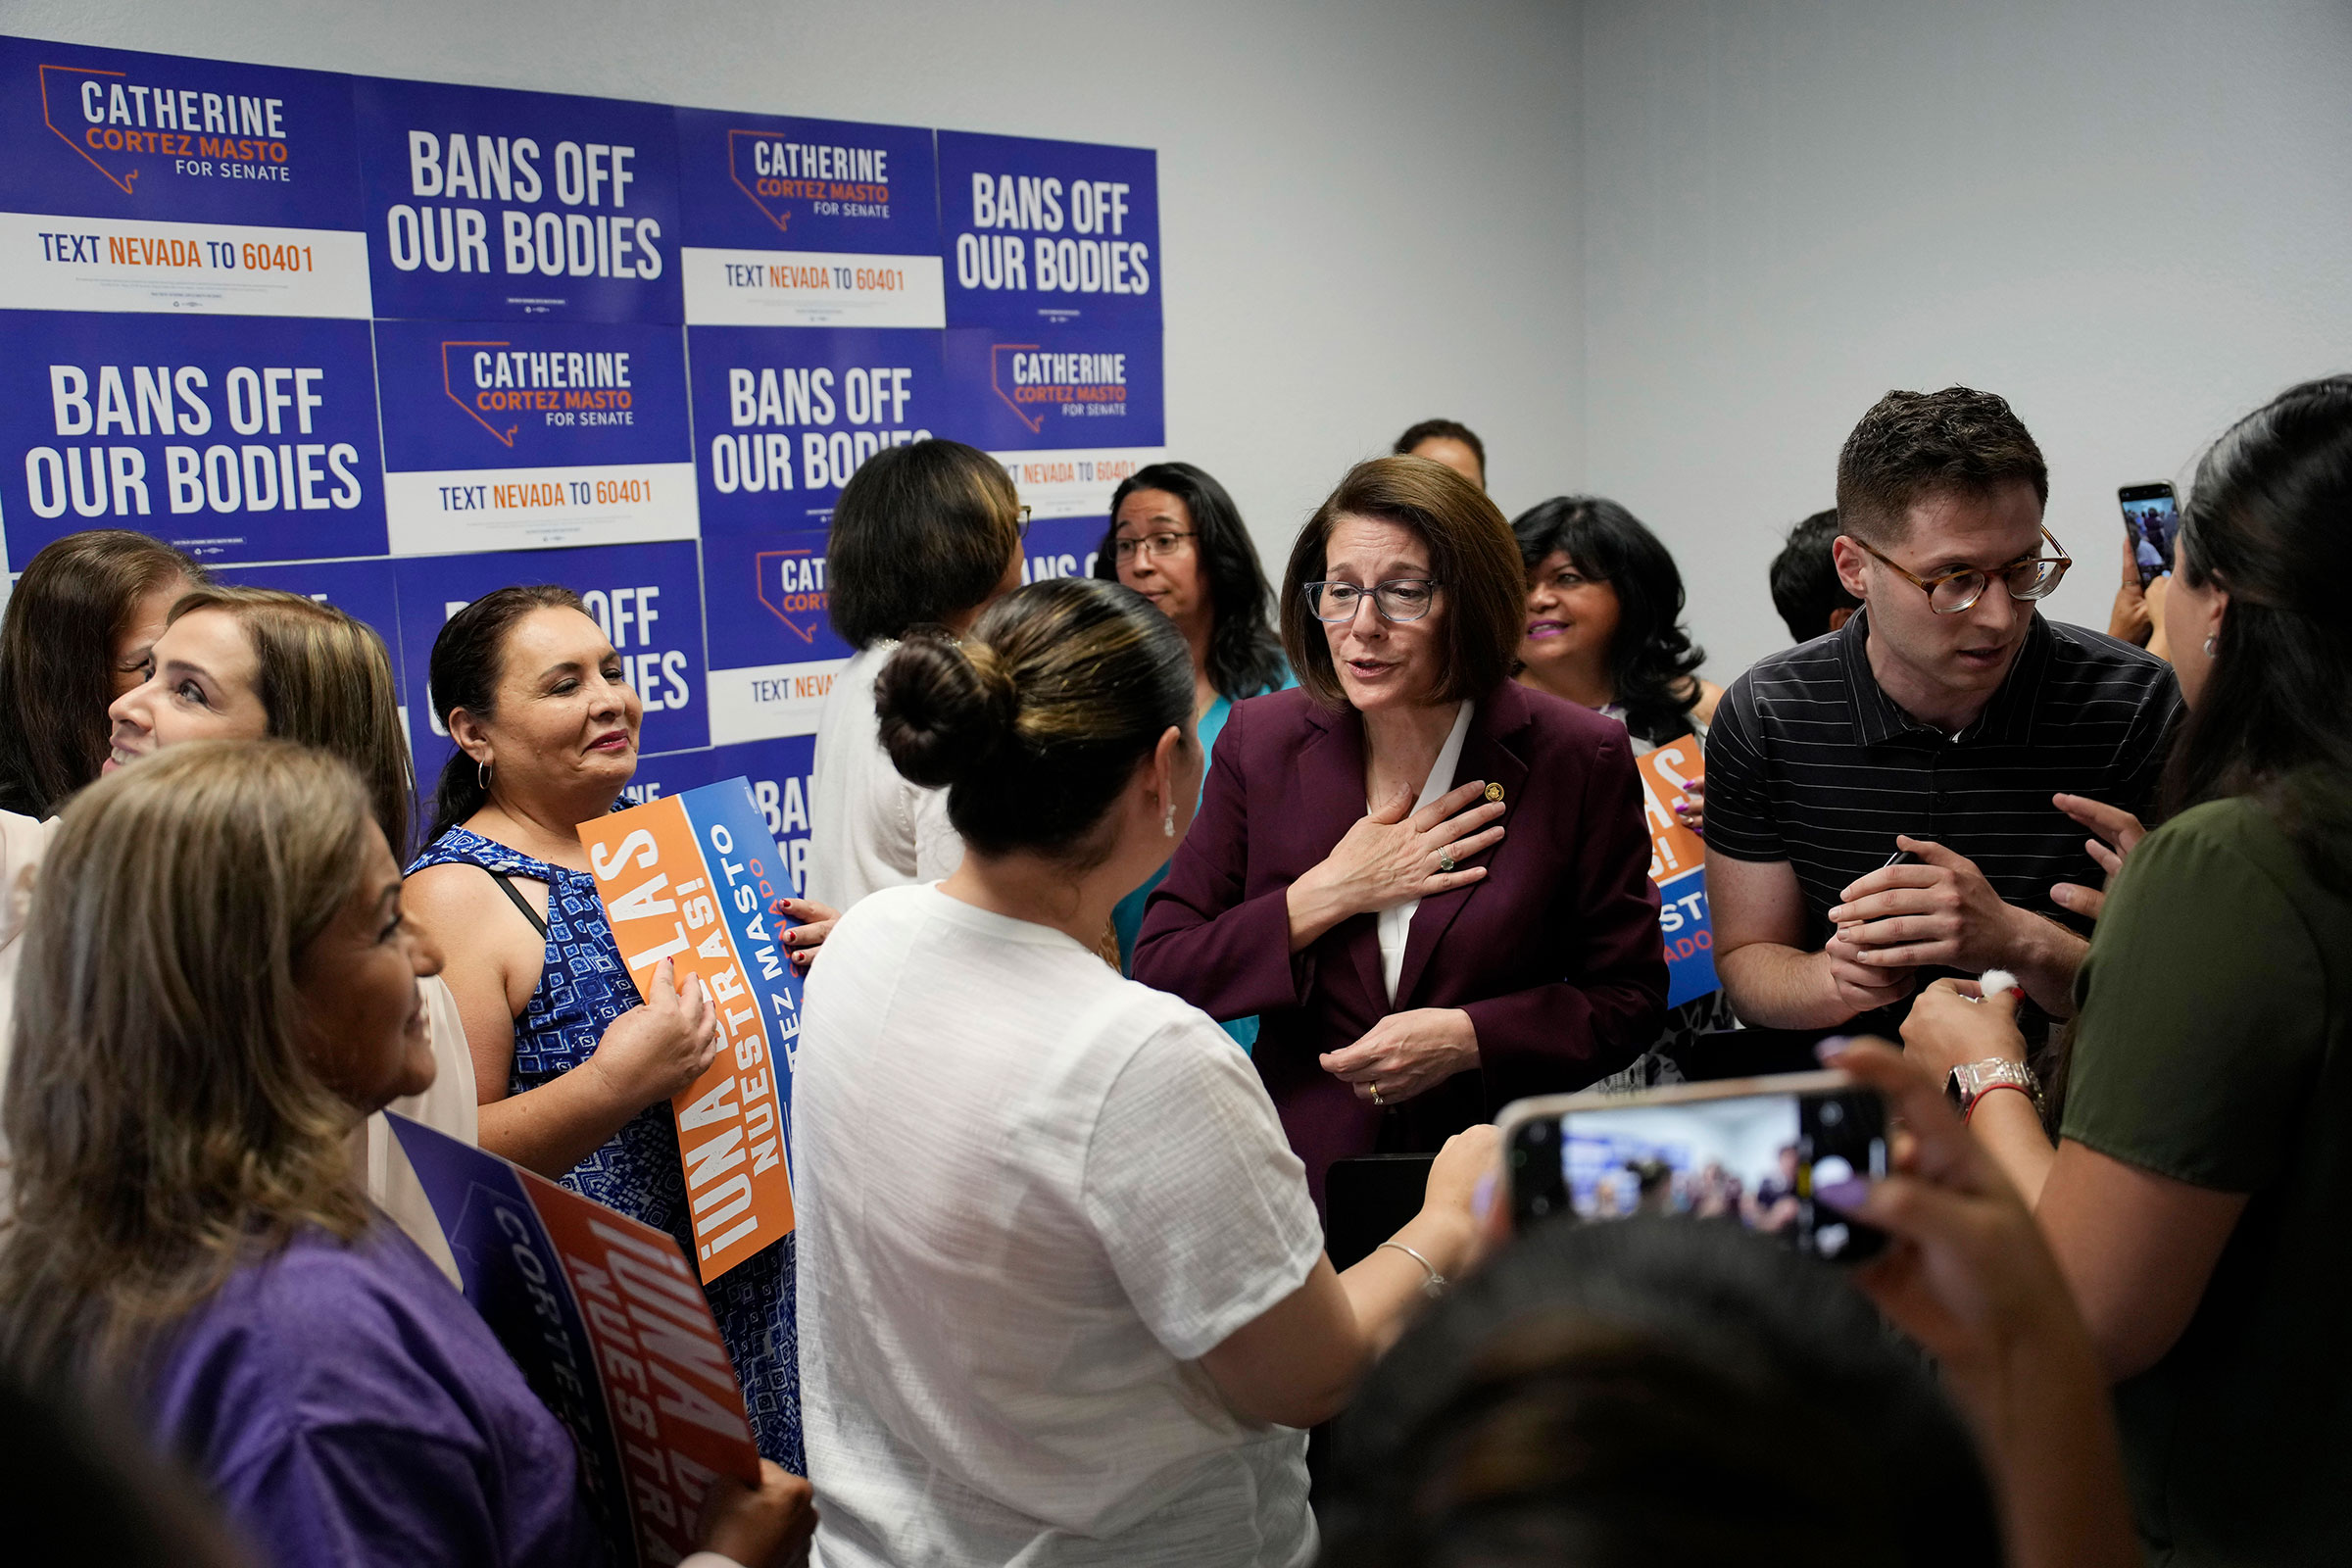 Sen. Catherine Cortez Masto meets with supporters after speaking on abortion rights during an event in Las Vegas on July 1, 2022. (John Locher—AP)